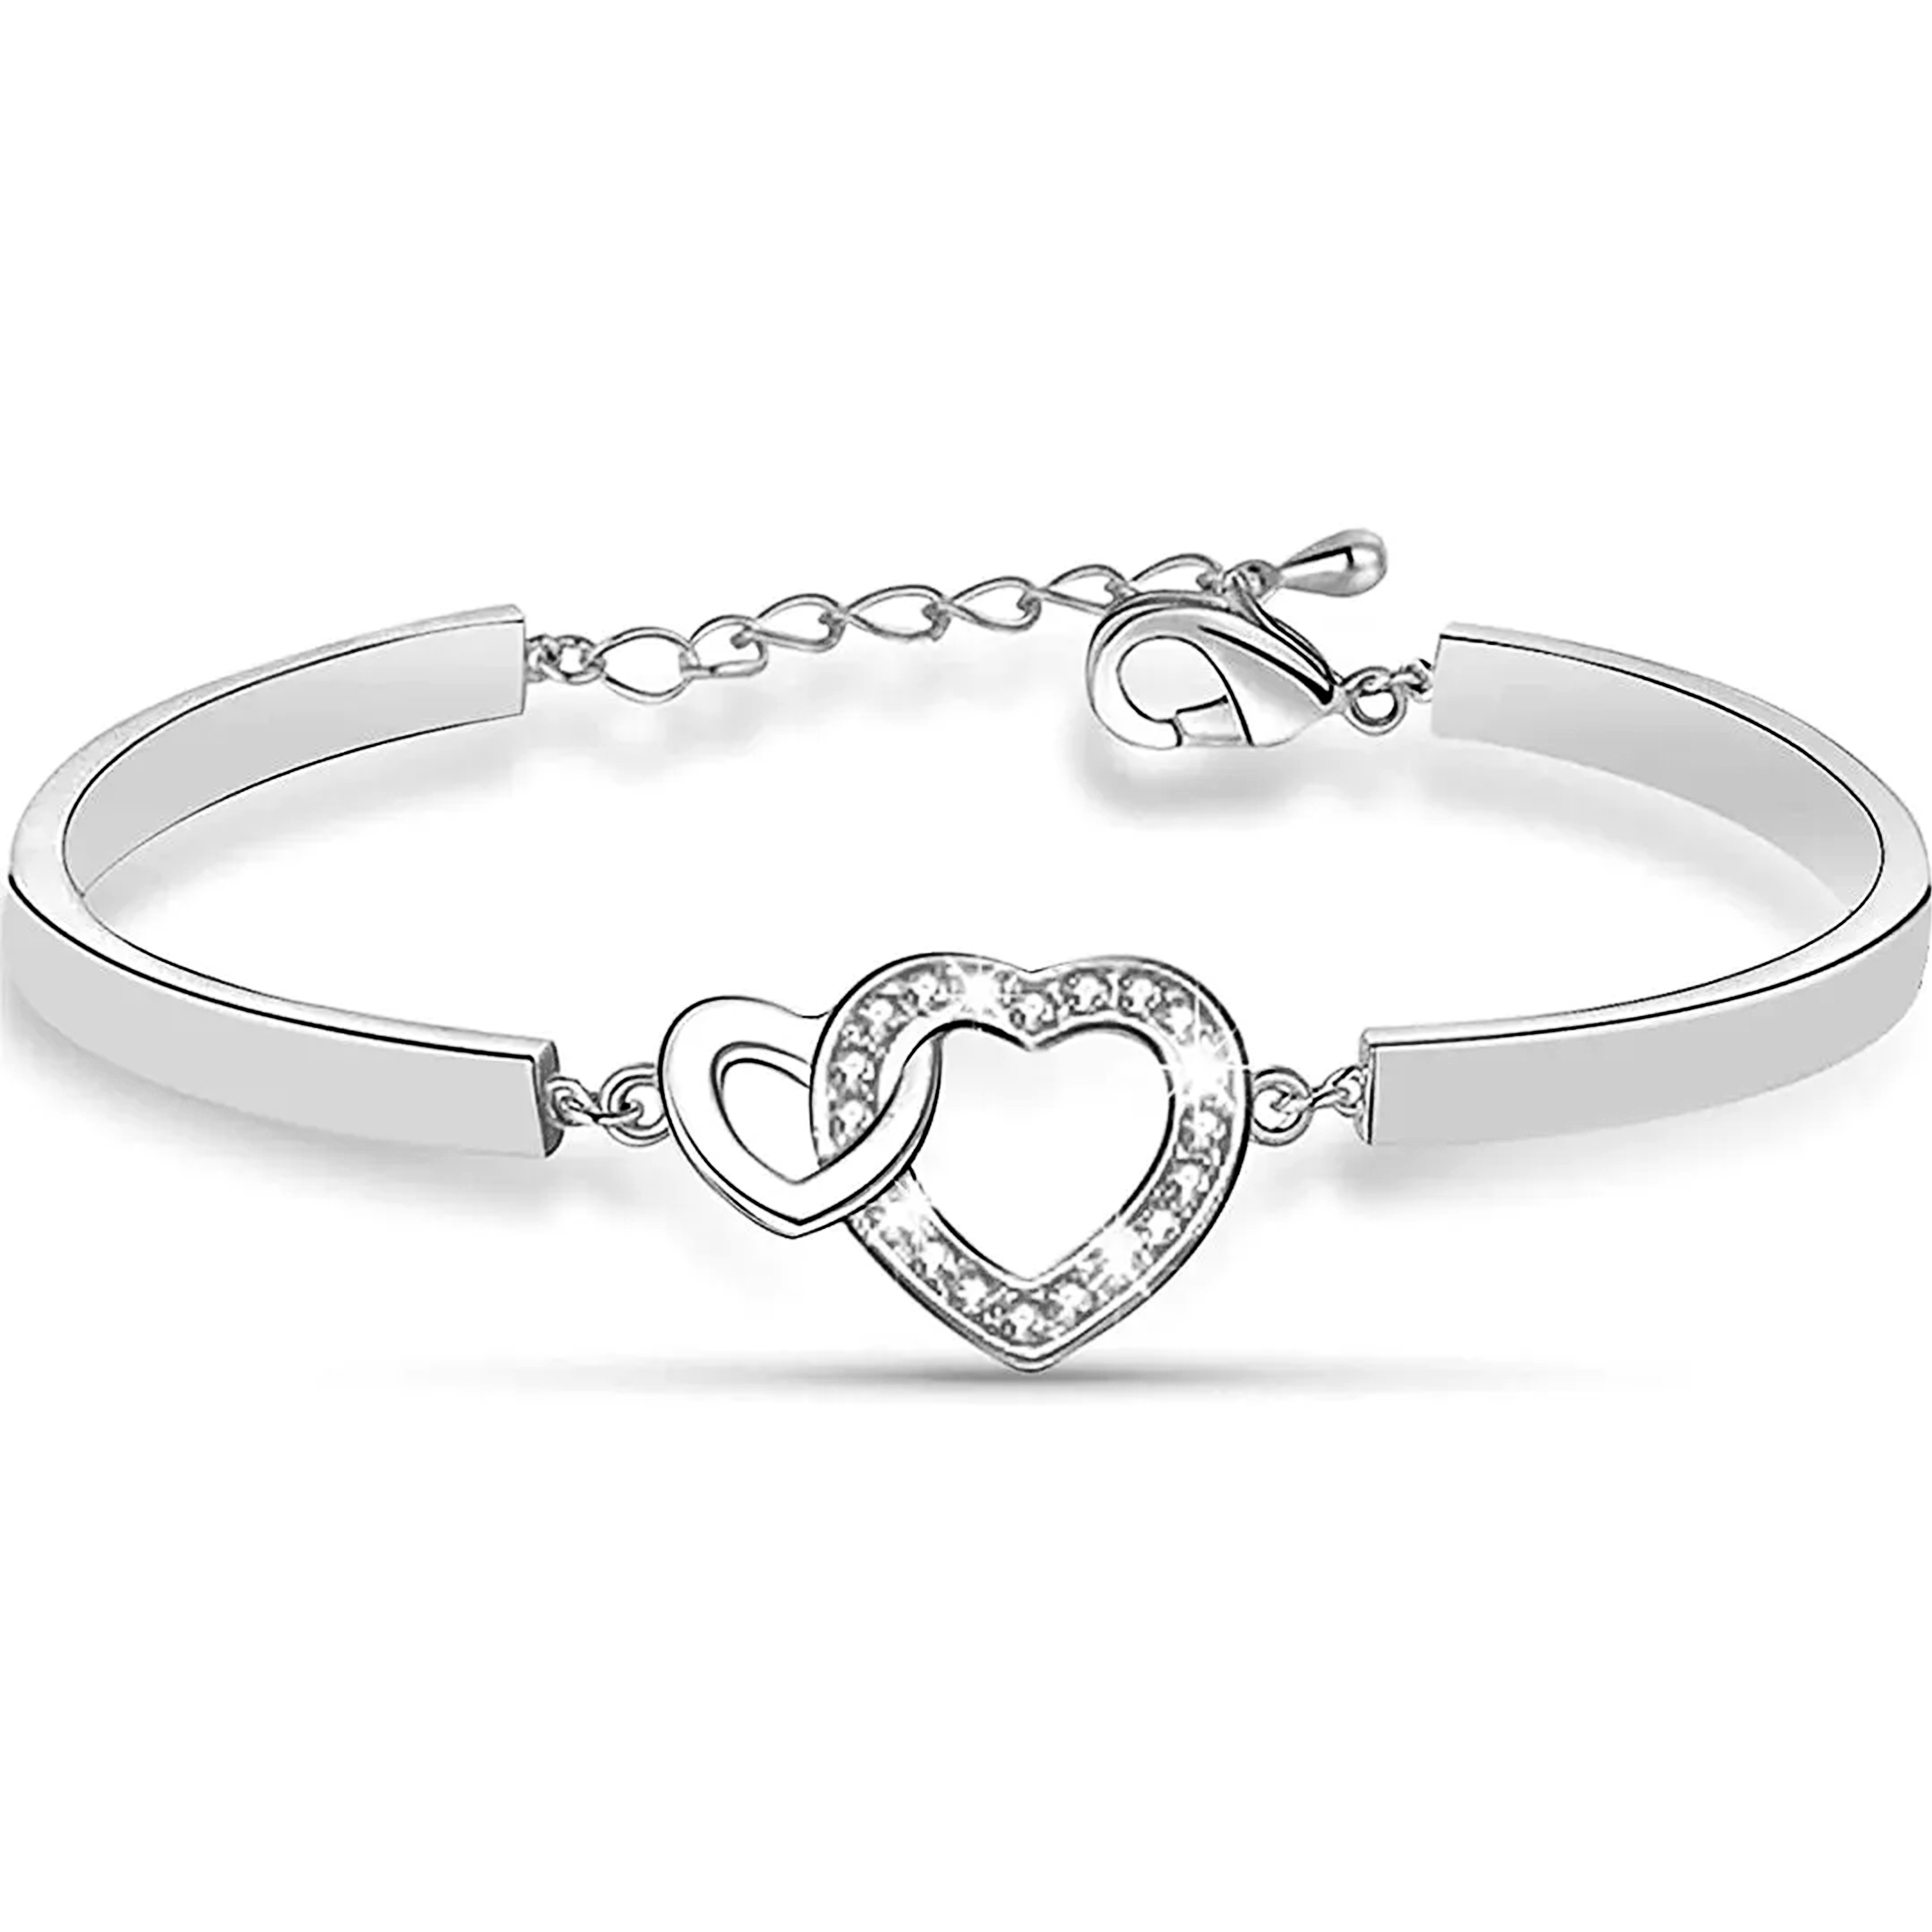 For Mother - Mother And Daughter Heart To Heart Bracelet